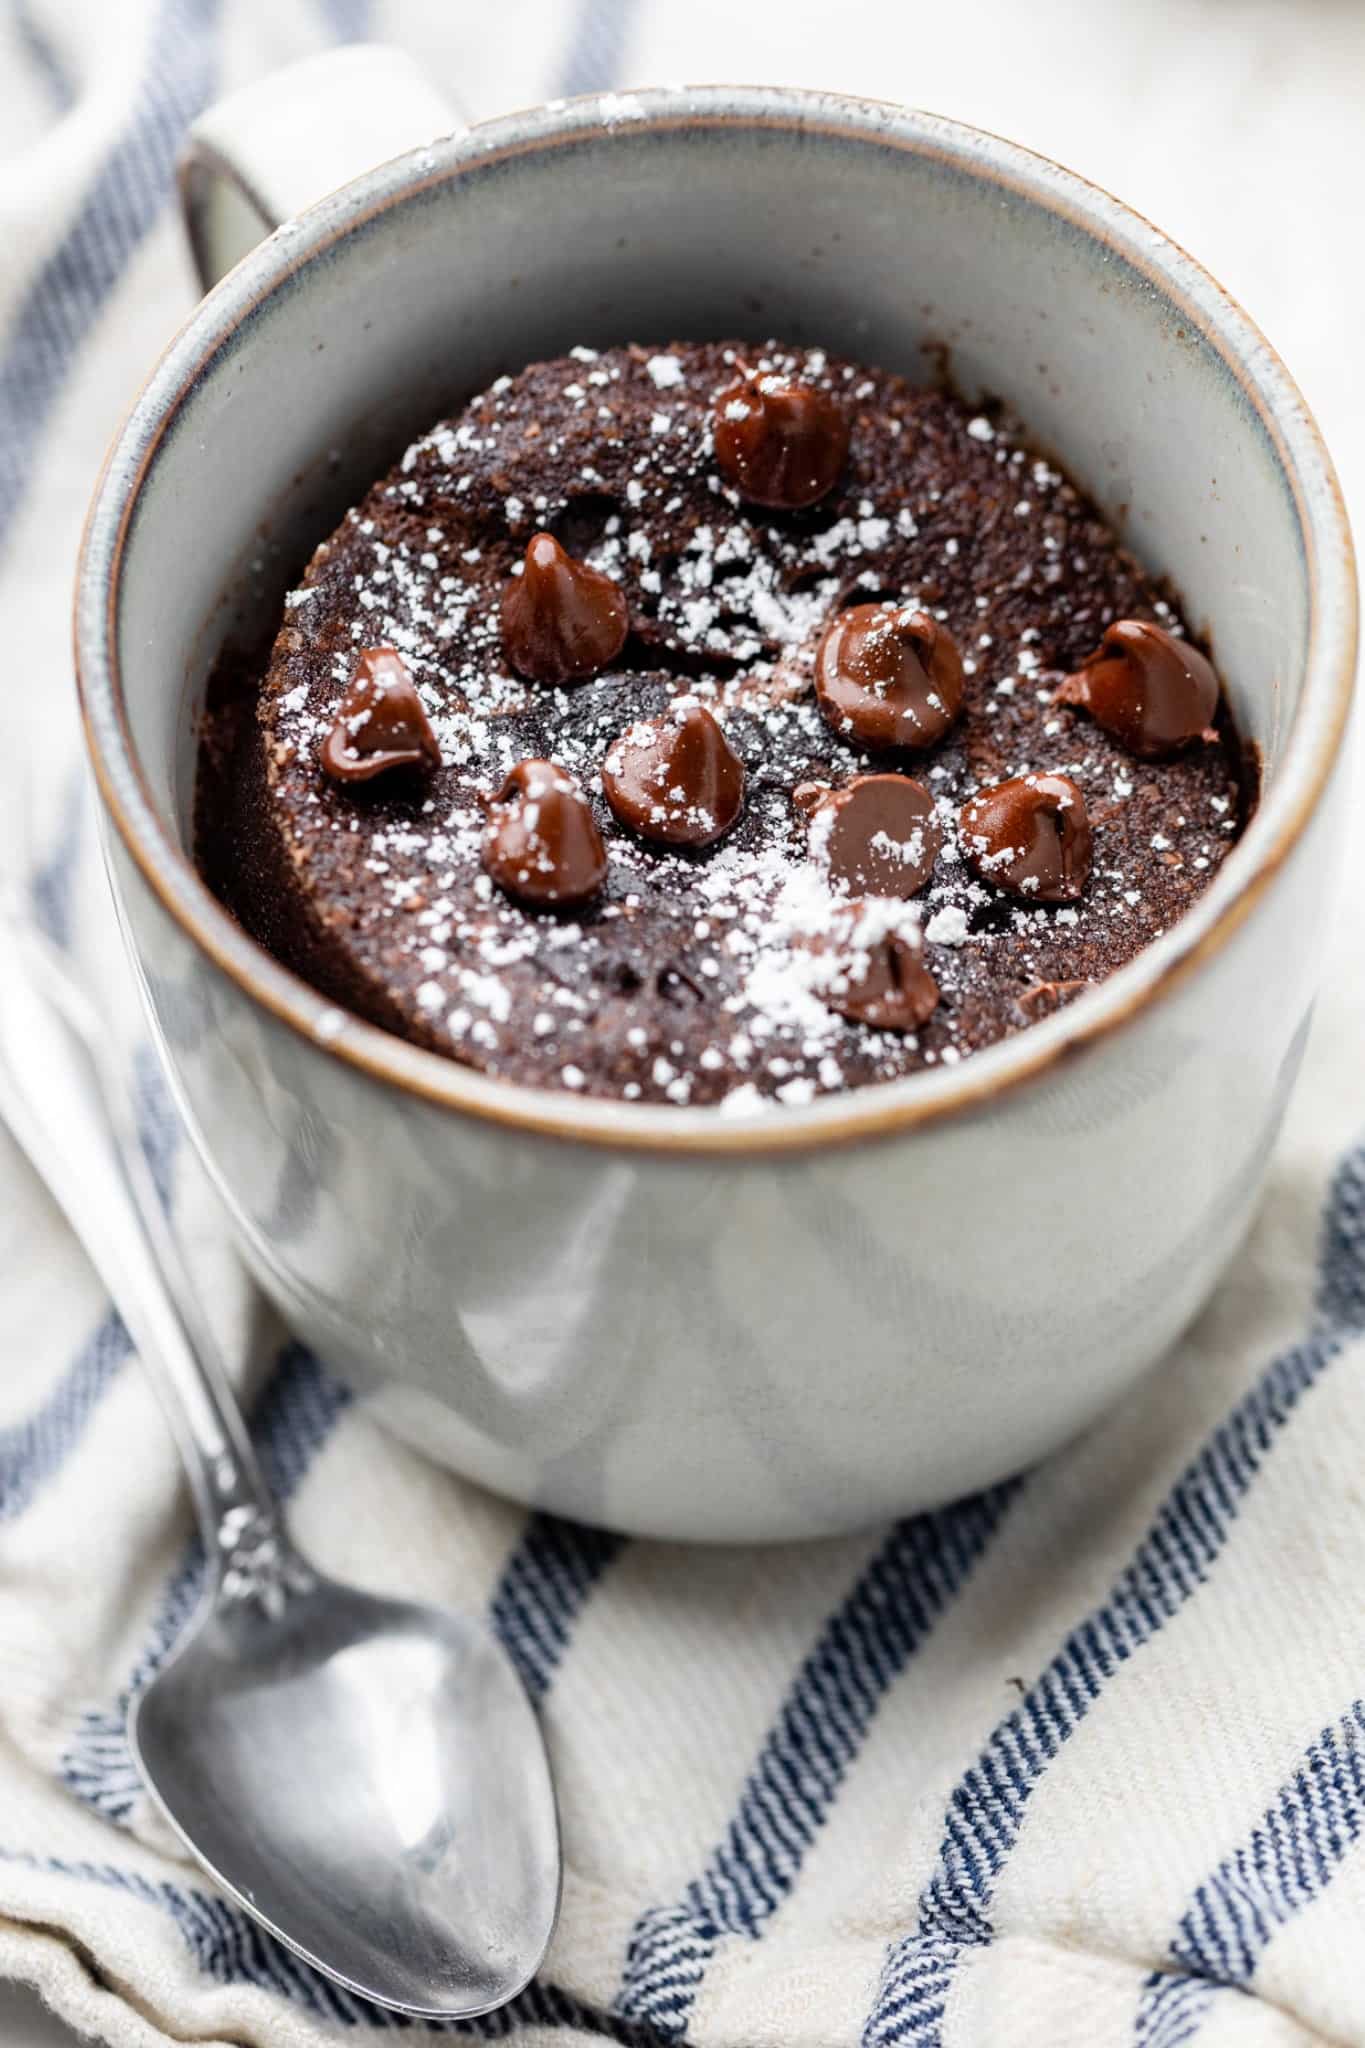 A mug with the cake baked inside with chocolate chips and powdered sugar on top.